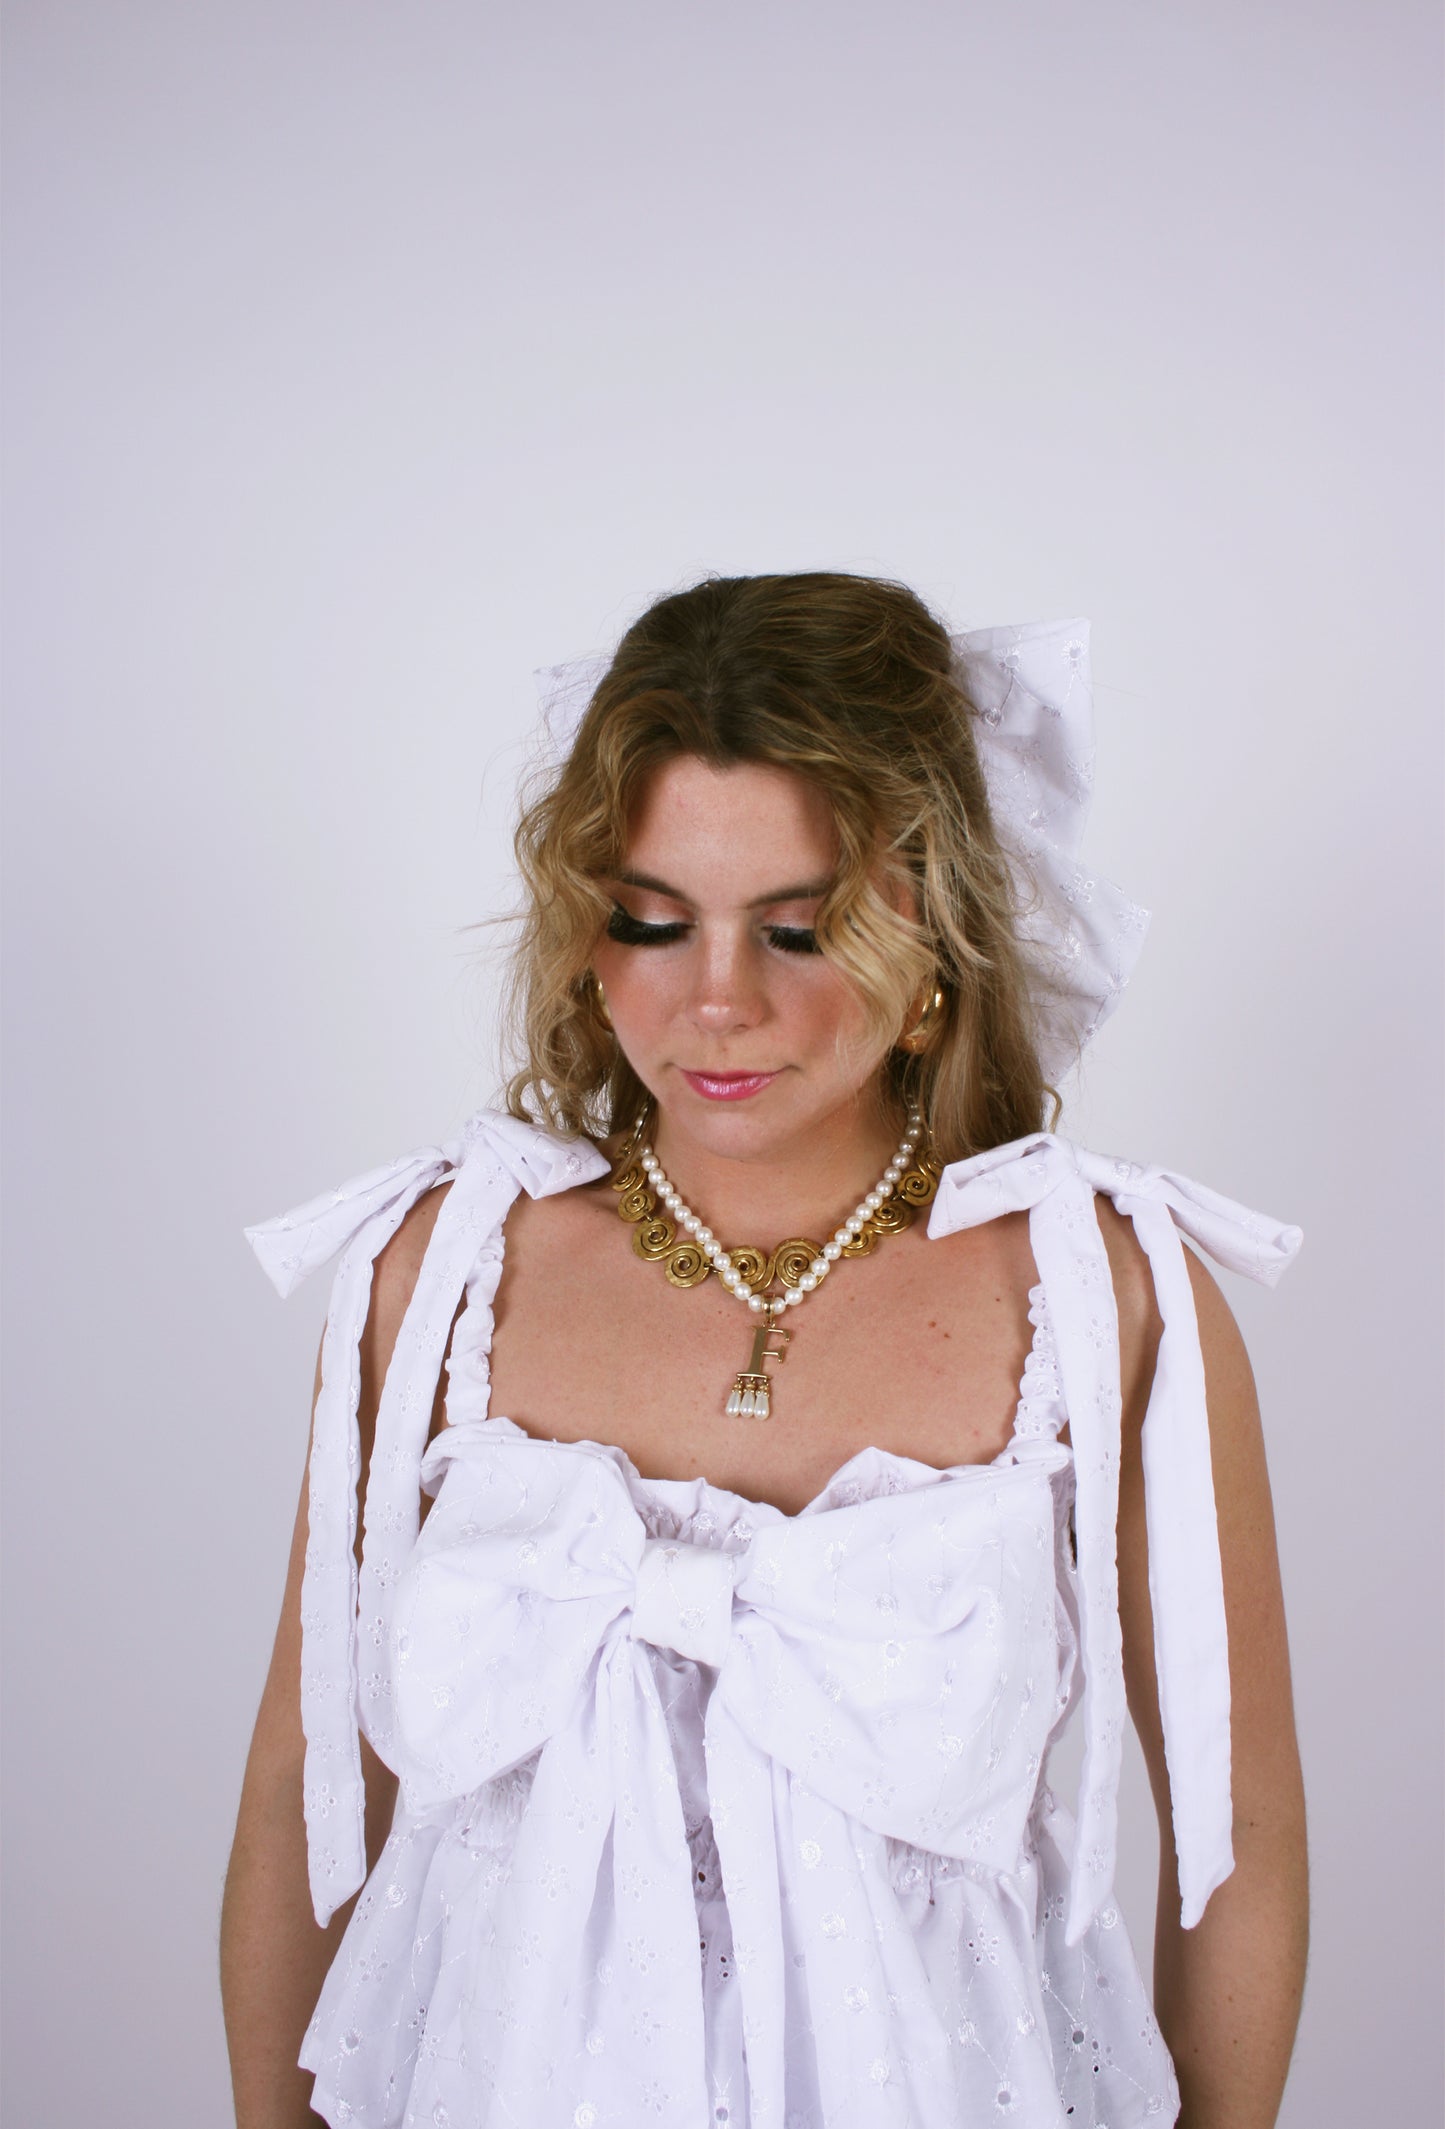 GYPSY ✧ White Broderie Anglaise Bow Top